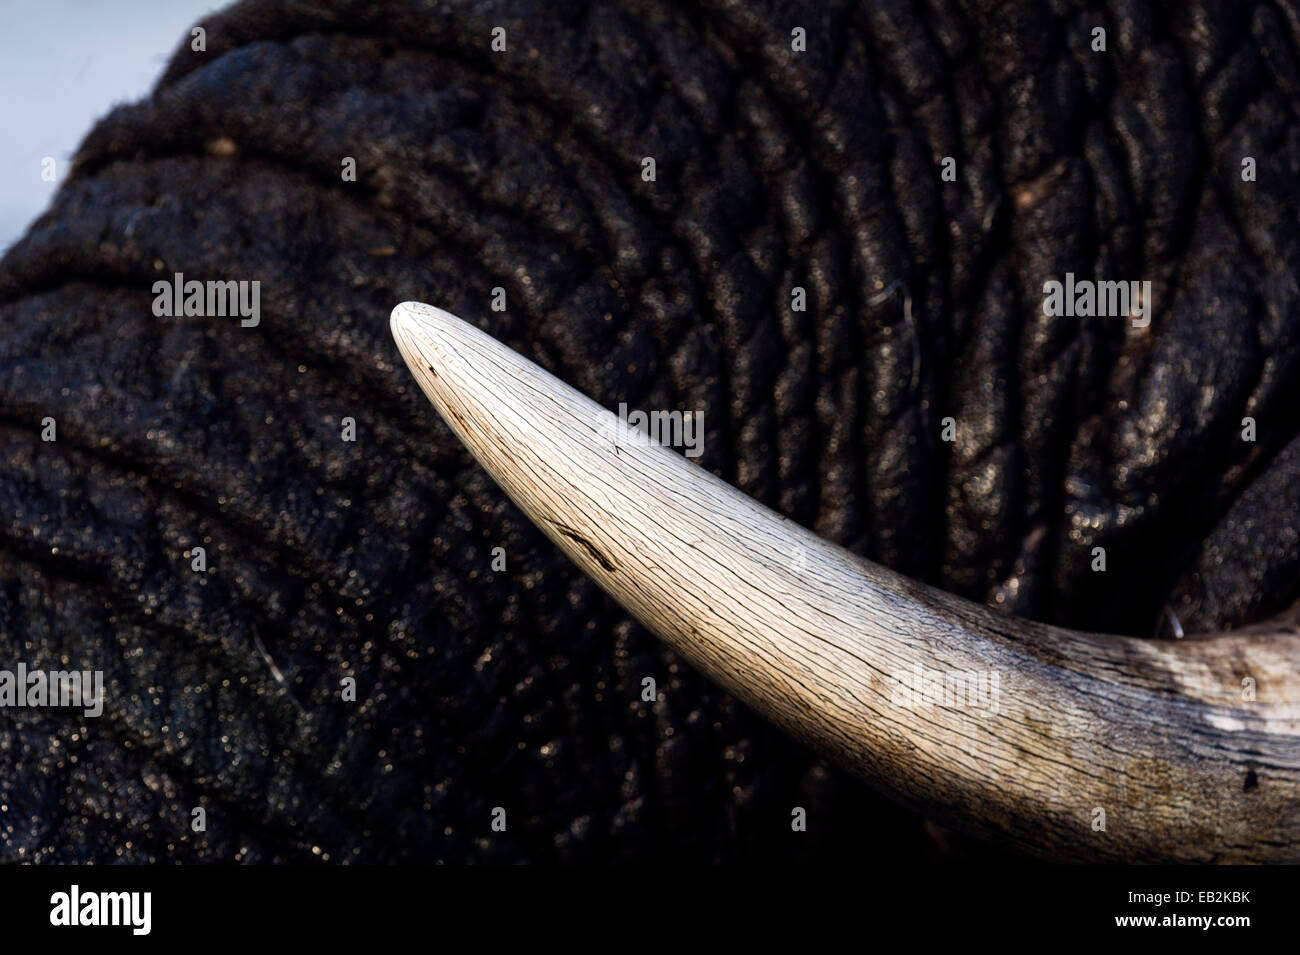 The pointed ivory tusk of an African Elephant swimming in a wetland. Stock Photo